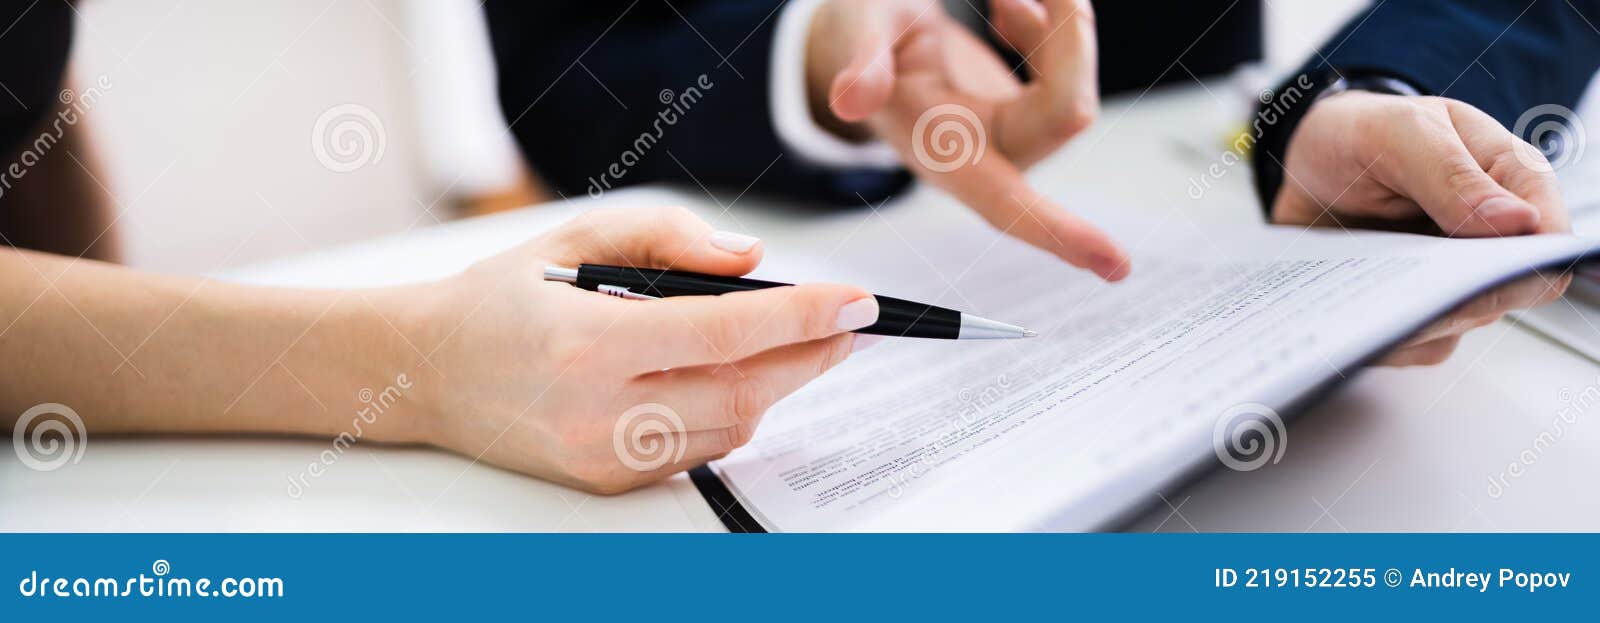 lawyer hand contract document review. auditor